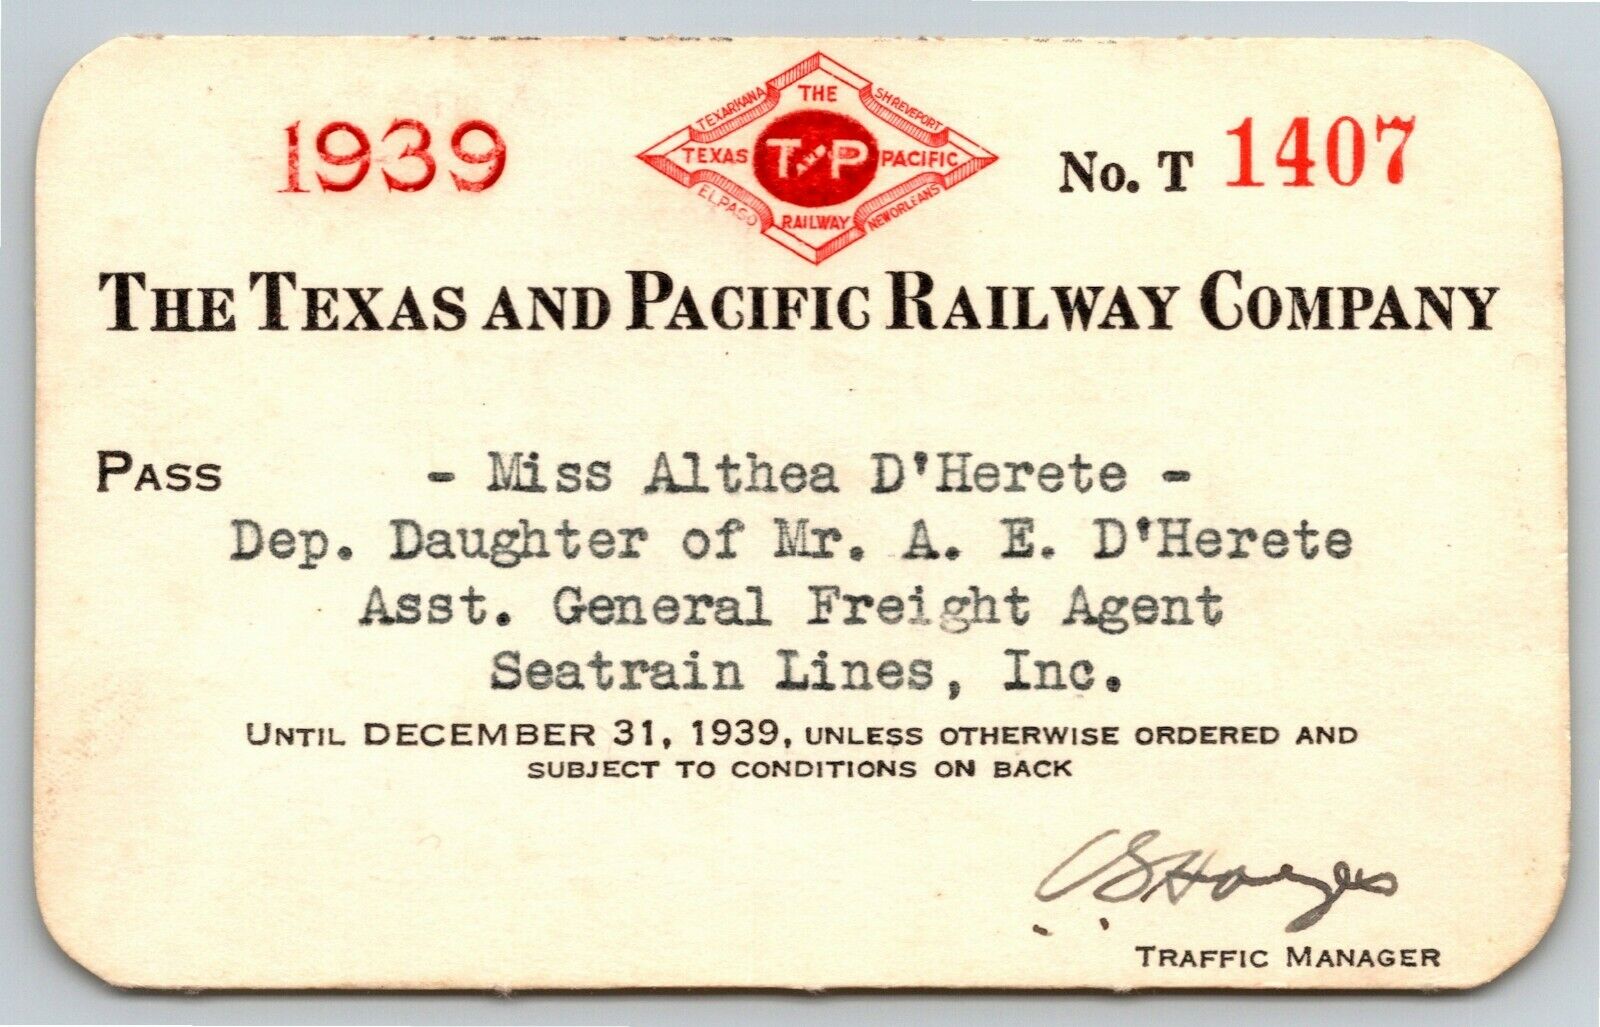 Vintage Railroad Annual Pass The Texas & Pacific Railway 1939 T1407 Thermography